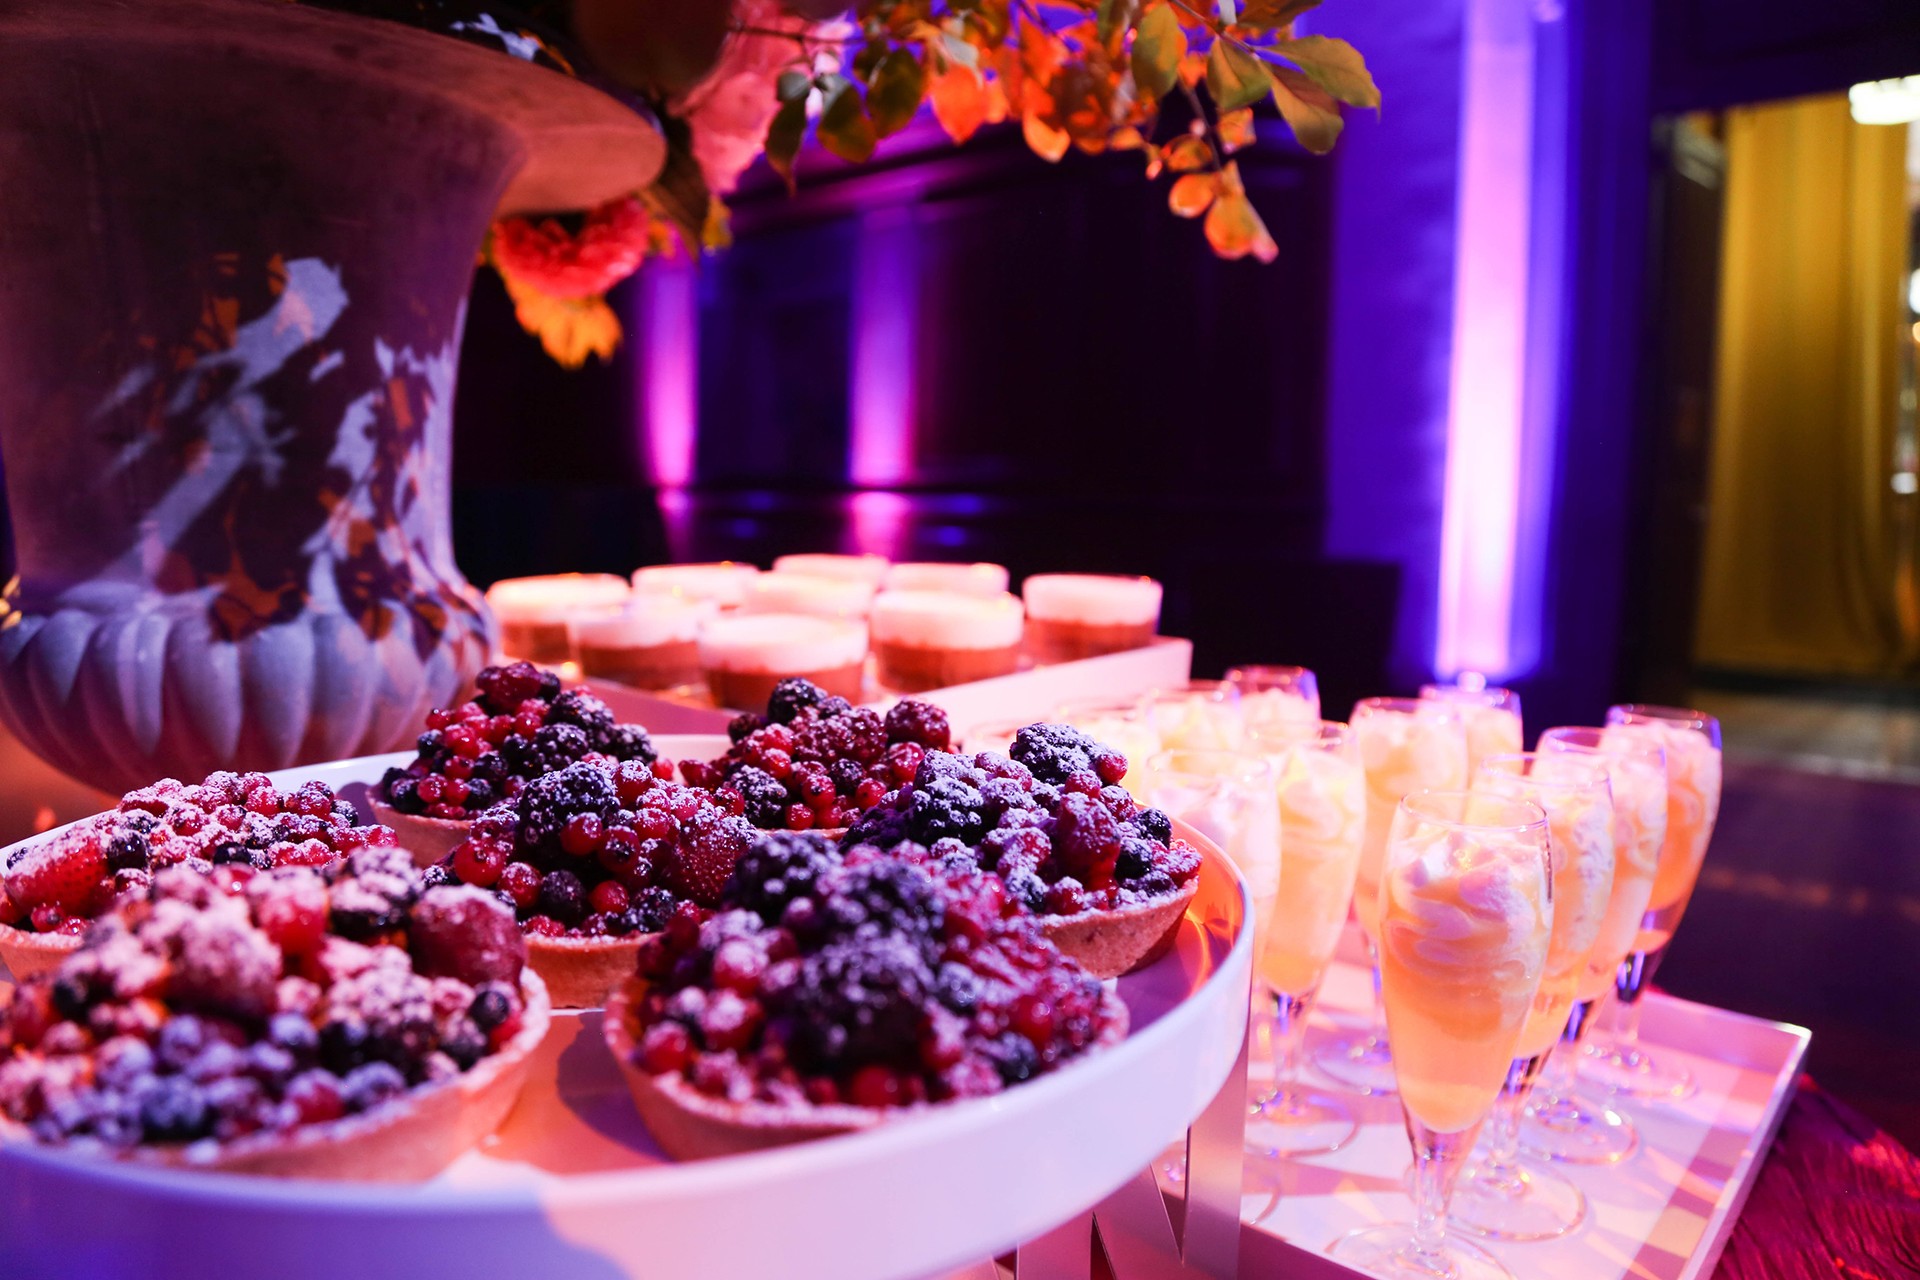 A photo of an event setup with delicious desserts.